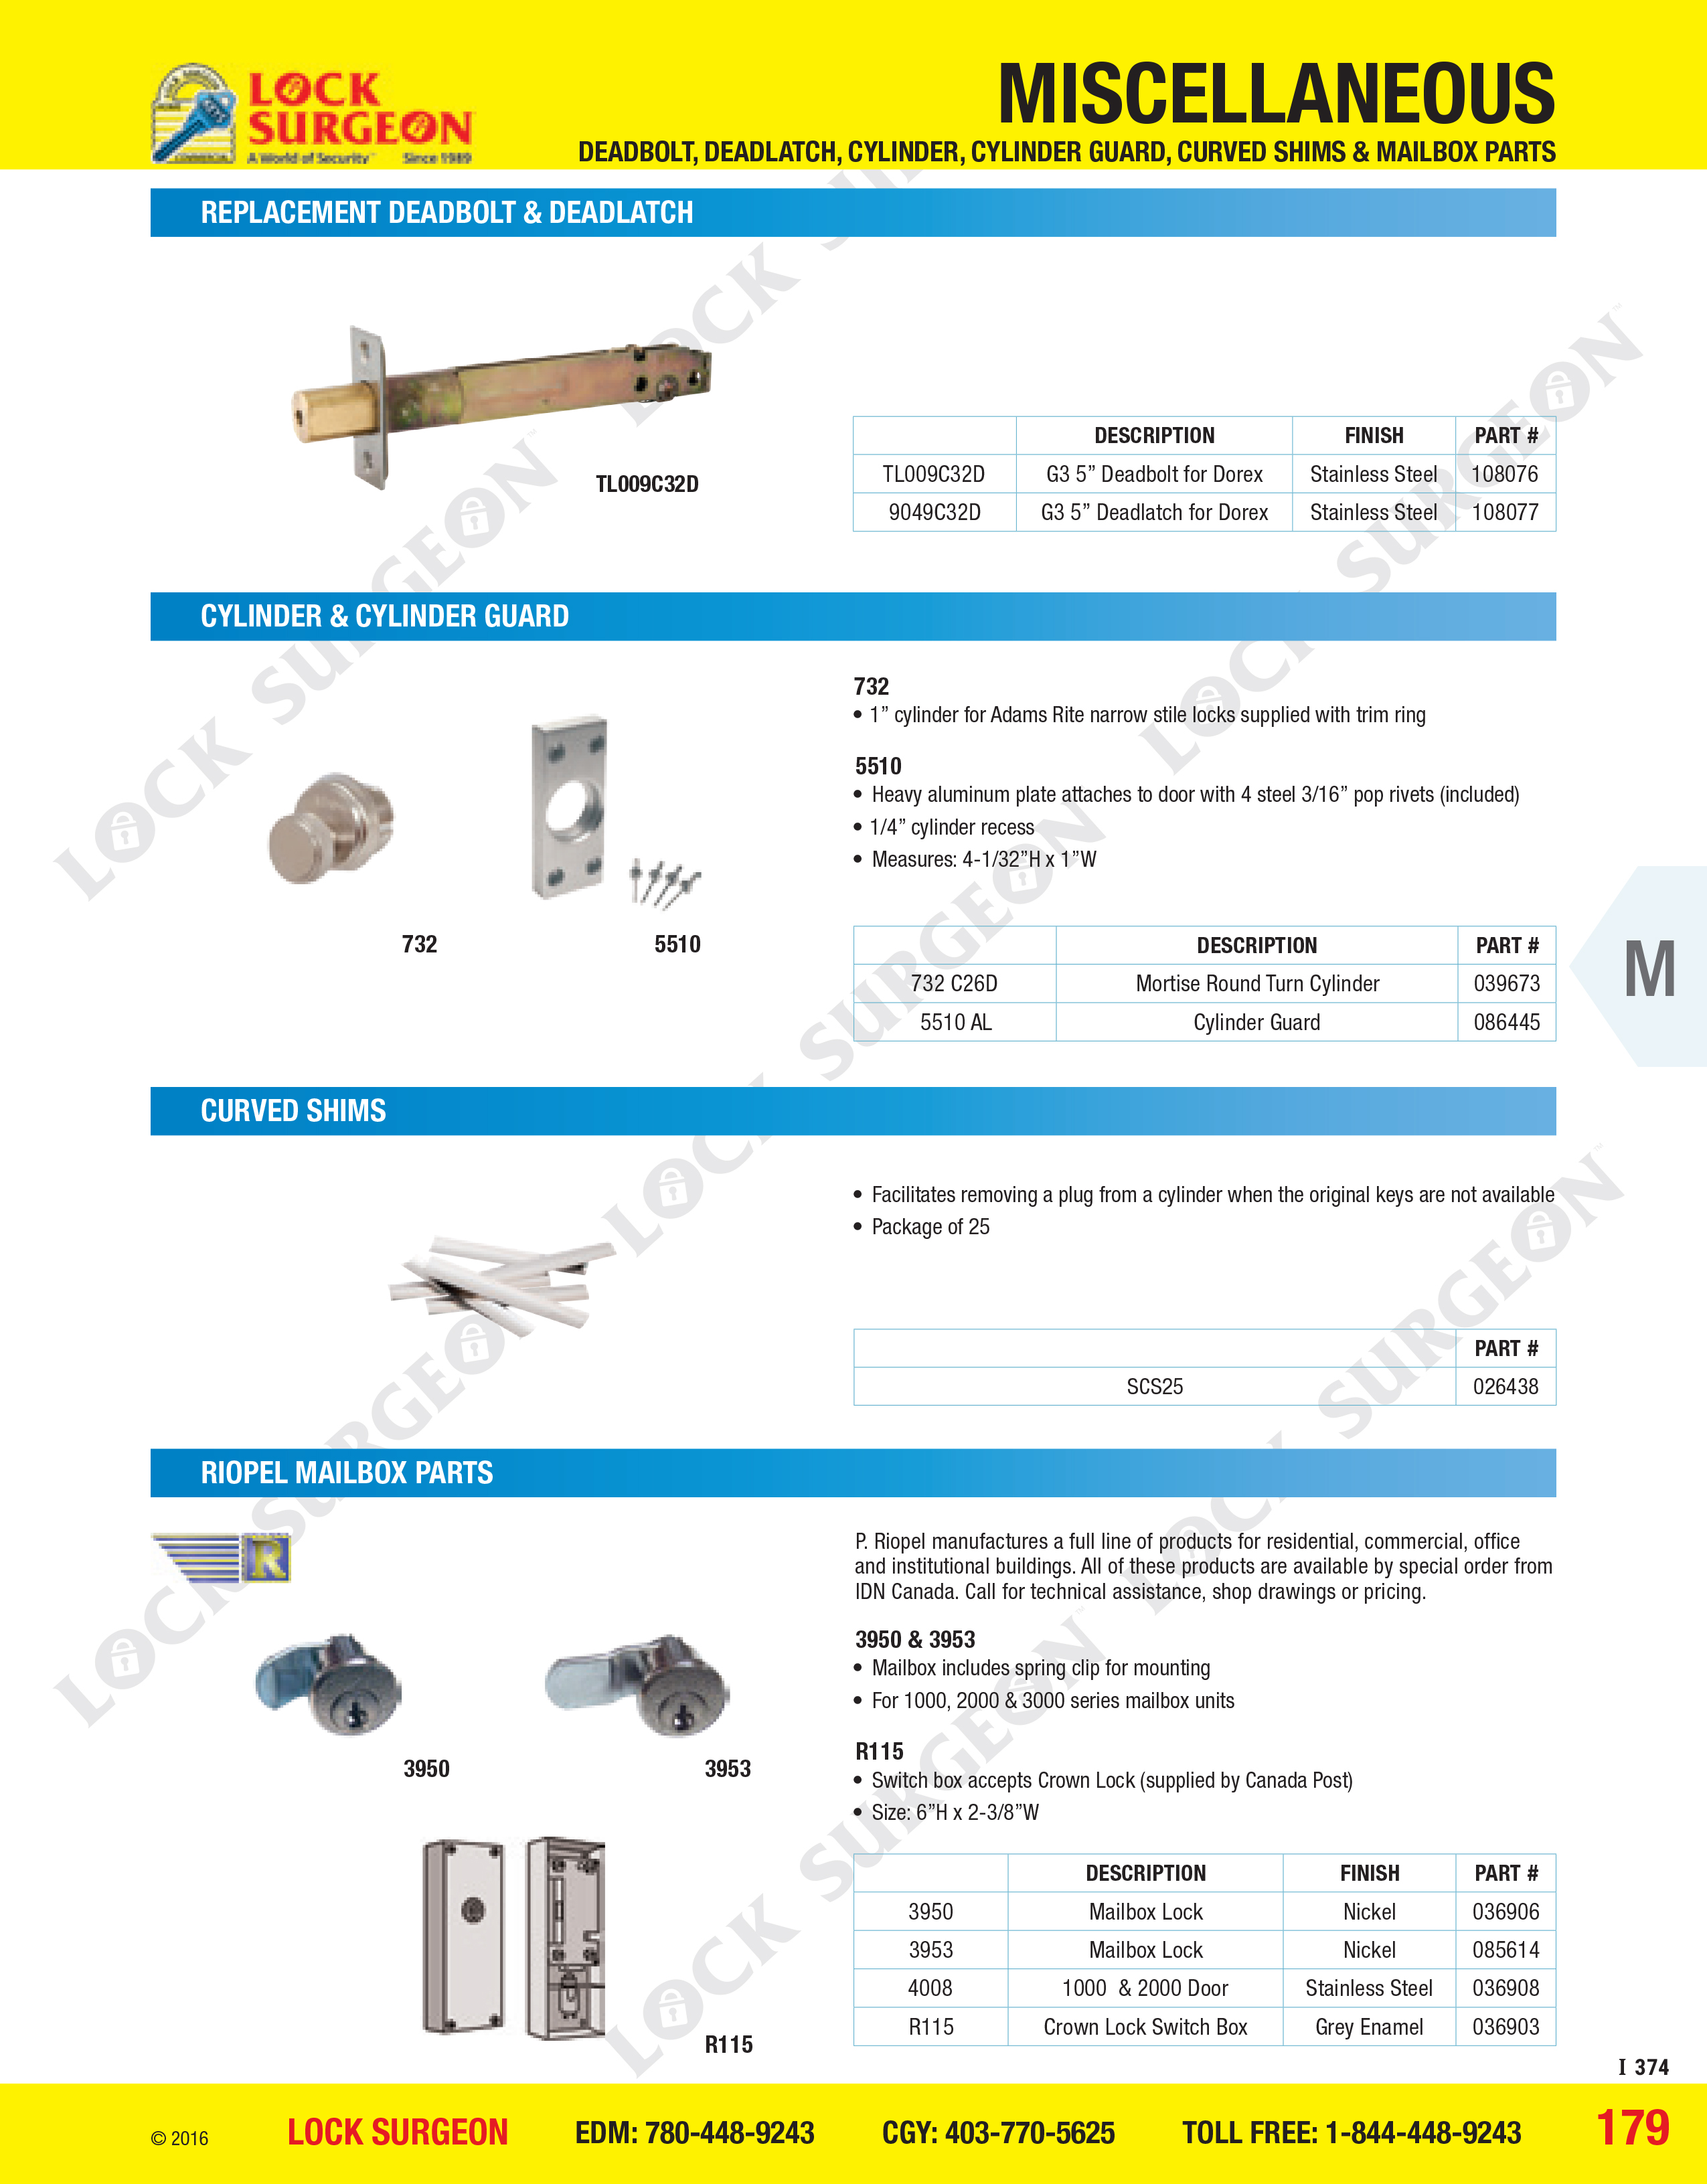 Miscellaneous parts for door deadbolts, deadlatches, cylinders and cylinder-guards Acheson.